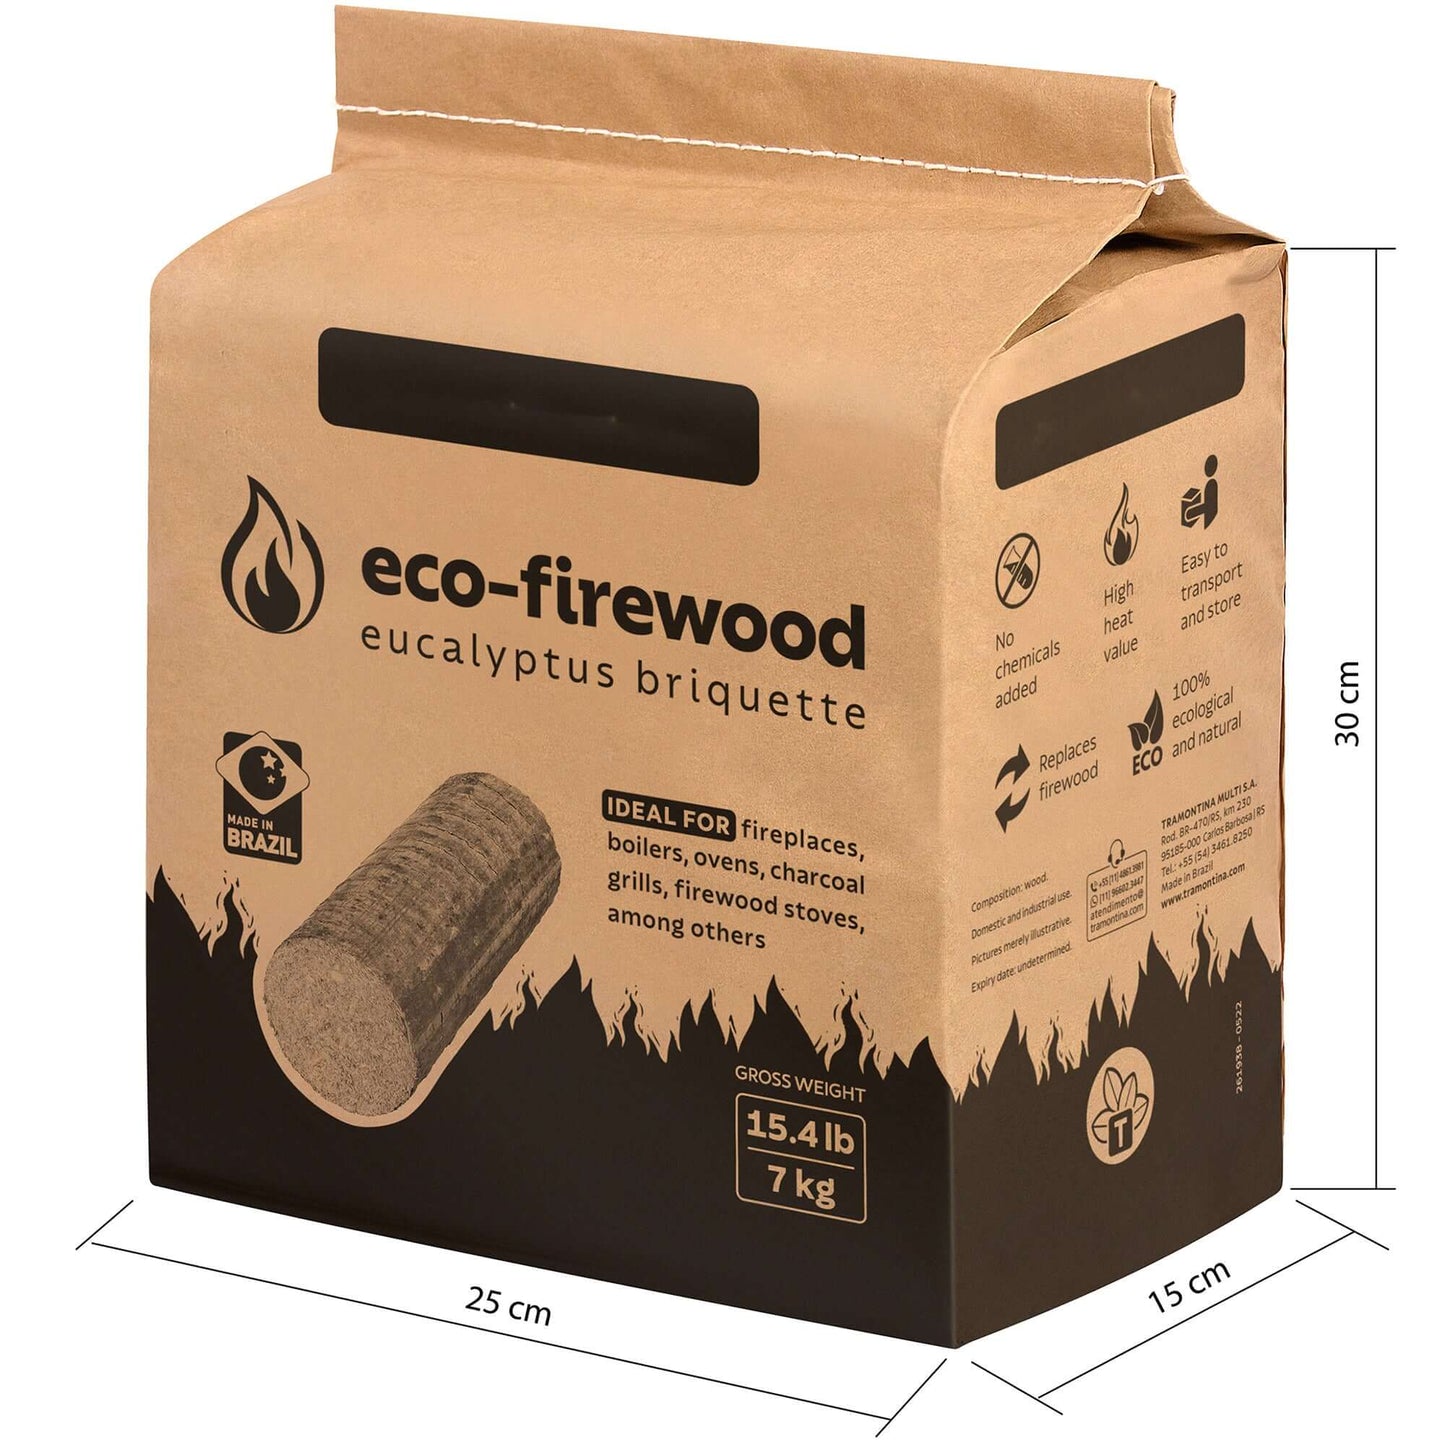 2x 7kg Eco Firewood Eucalyptus Hot Burning Briquettes for Open fires, charcoal & kiln dried log eco-alternative. (2 Pack)